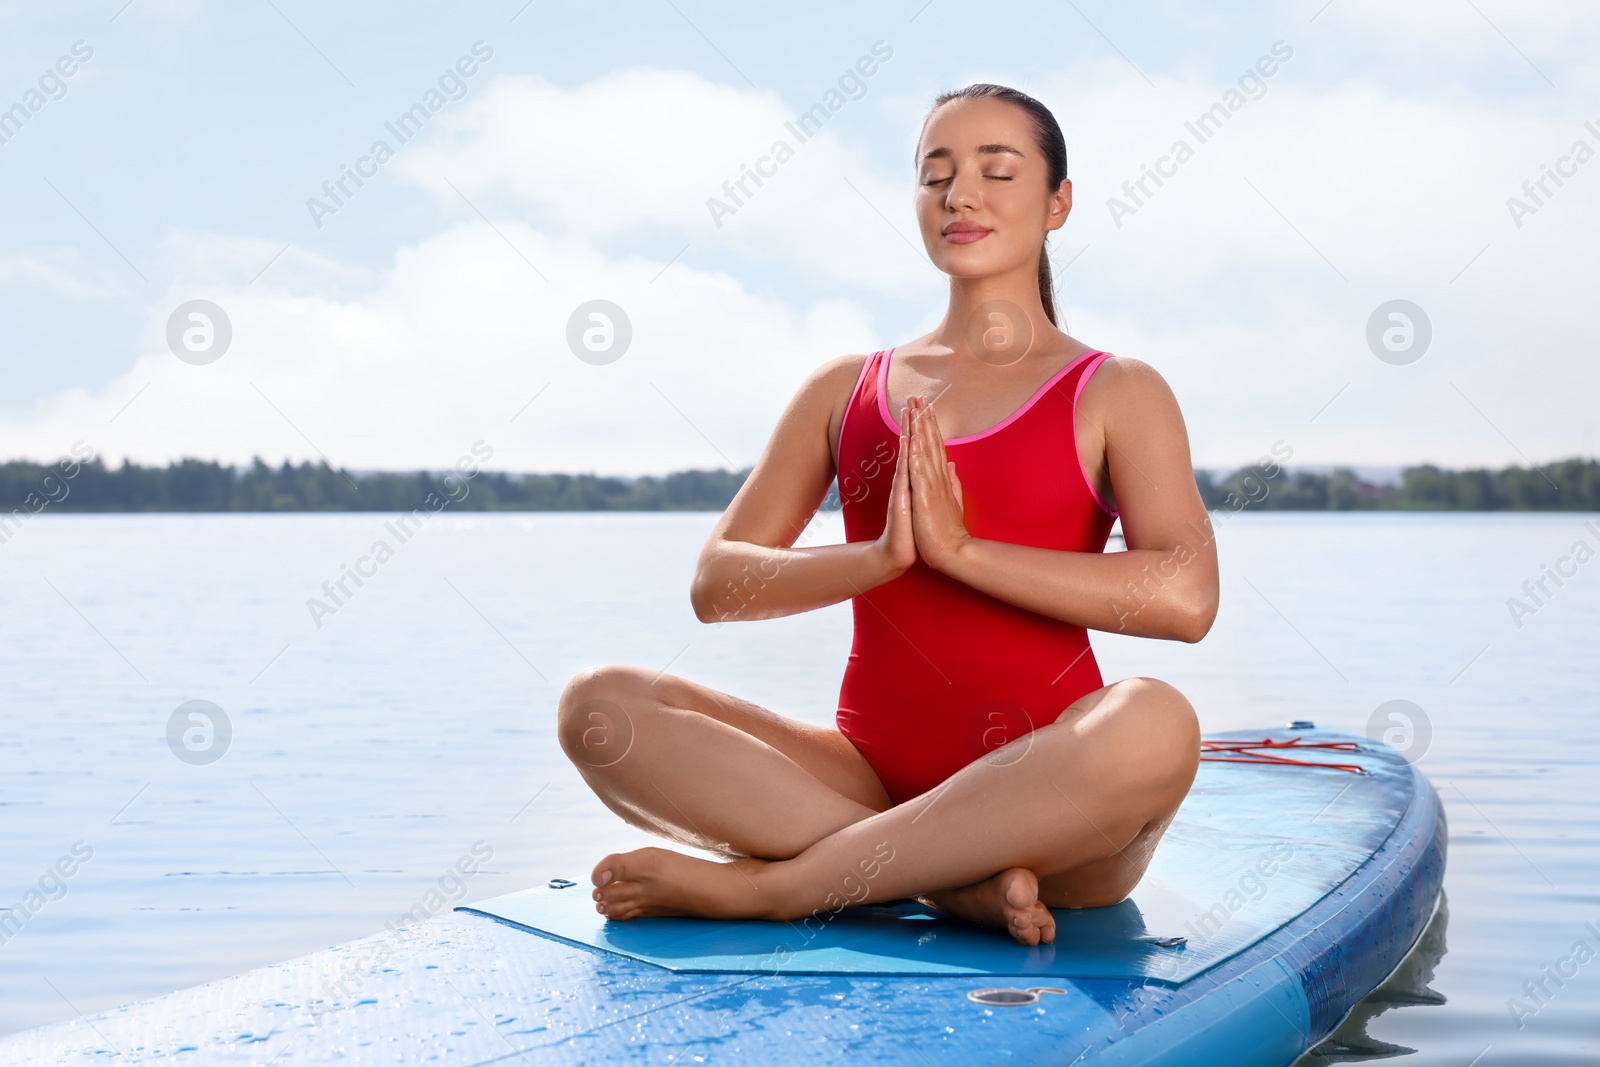 Photo of Woman practicing yoga on light blue SUP board on river